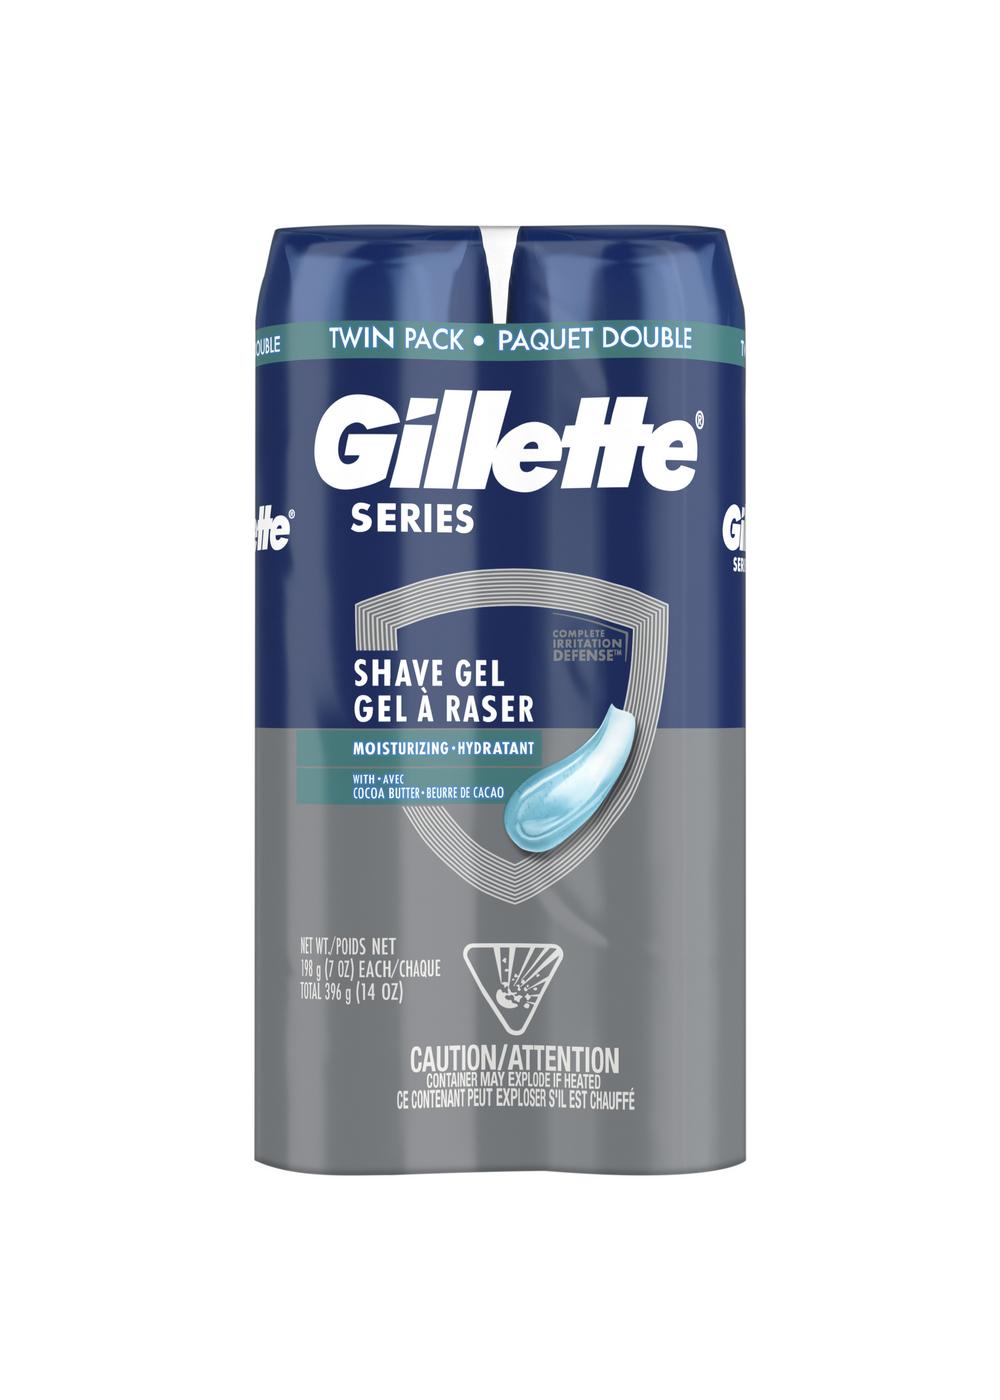 Gillette Series Shave Gel Twin Pack -  Moisturizing; image 1 of 8